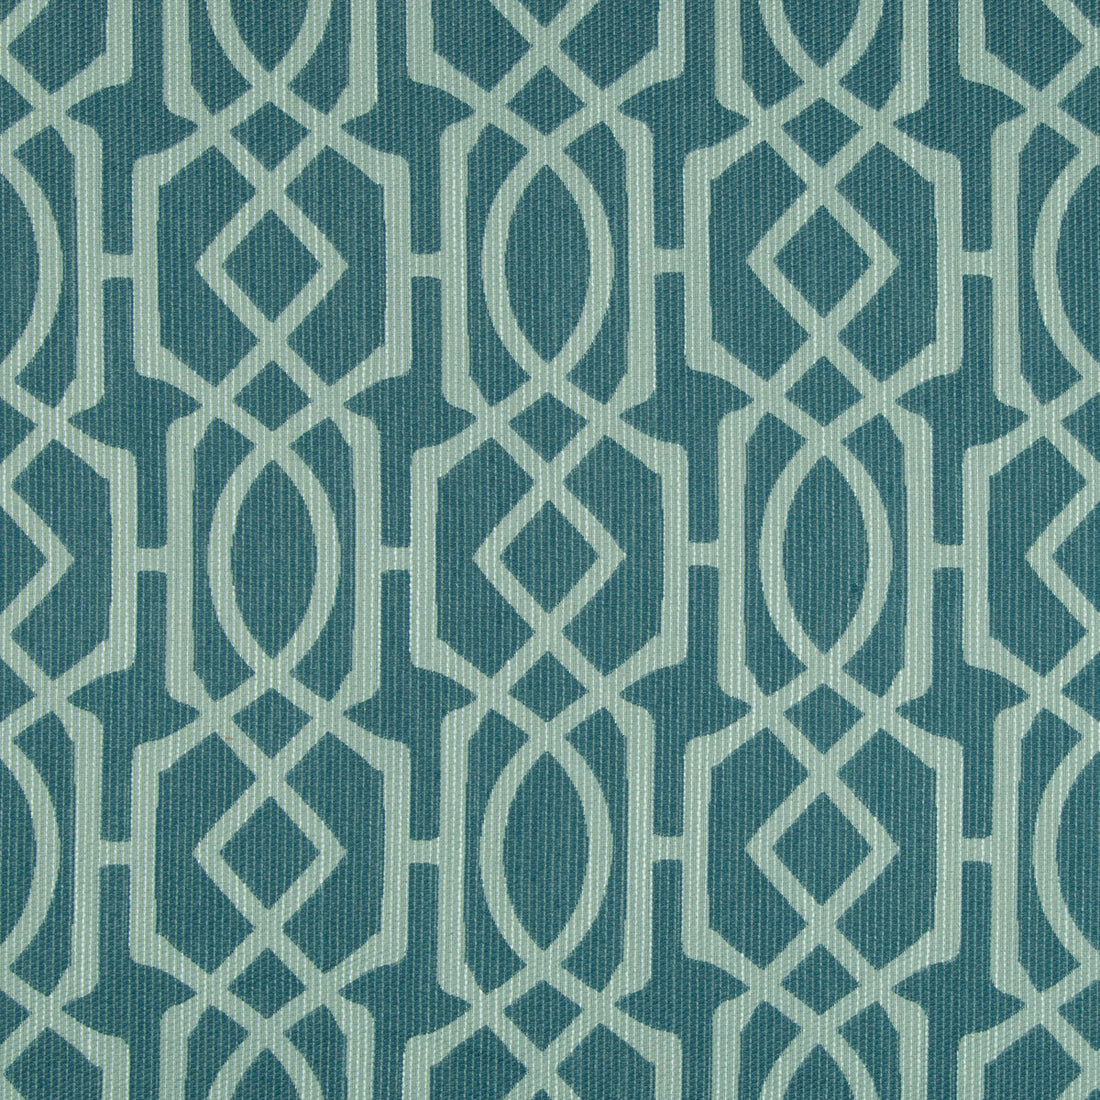 Kravet Contract fabric in 34762-35 color - pattern 34762.35.0 - by Kravet Contract in the Incase Crypton Gis collection